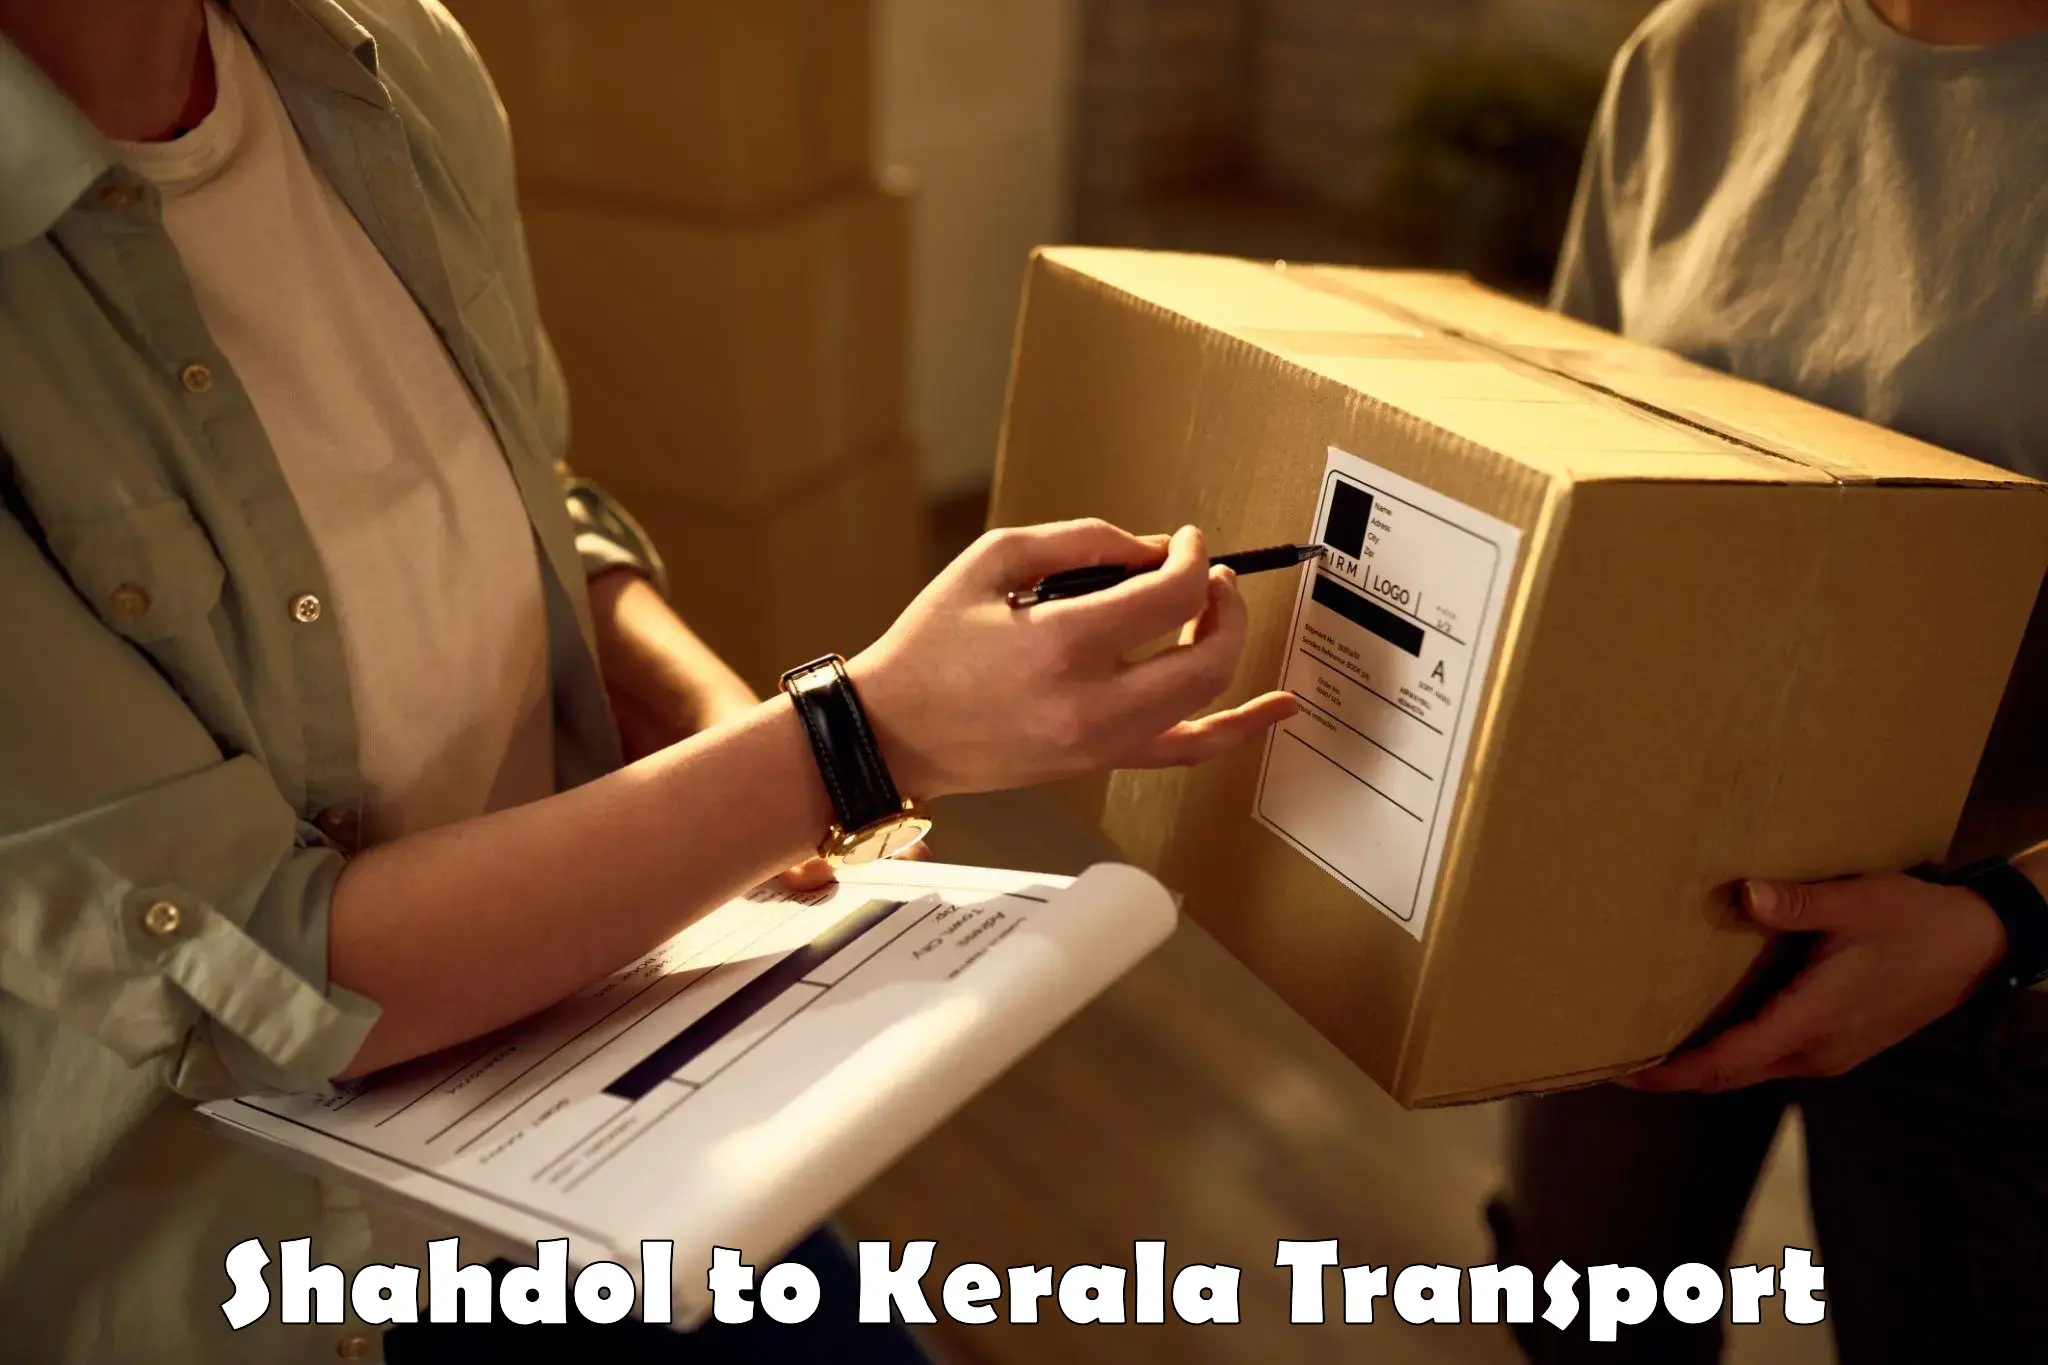 Two wheeler parcel service Shahdol to Trivandrum